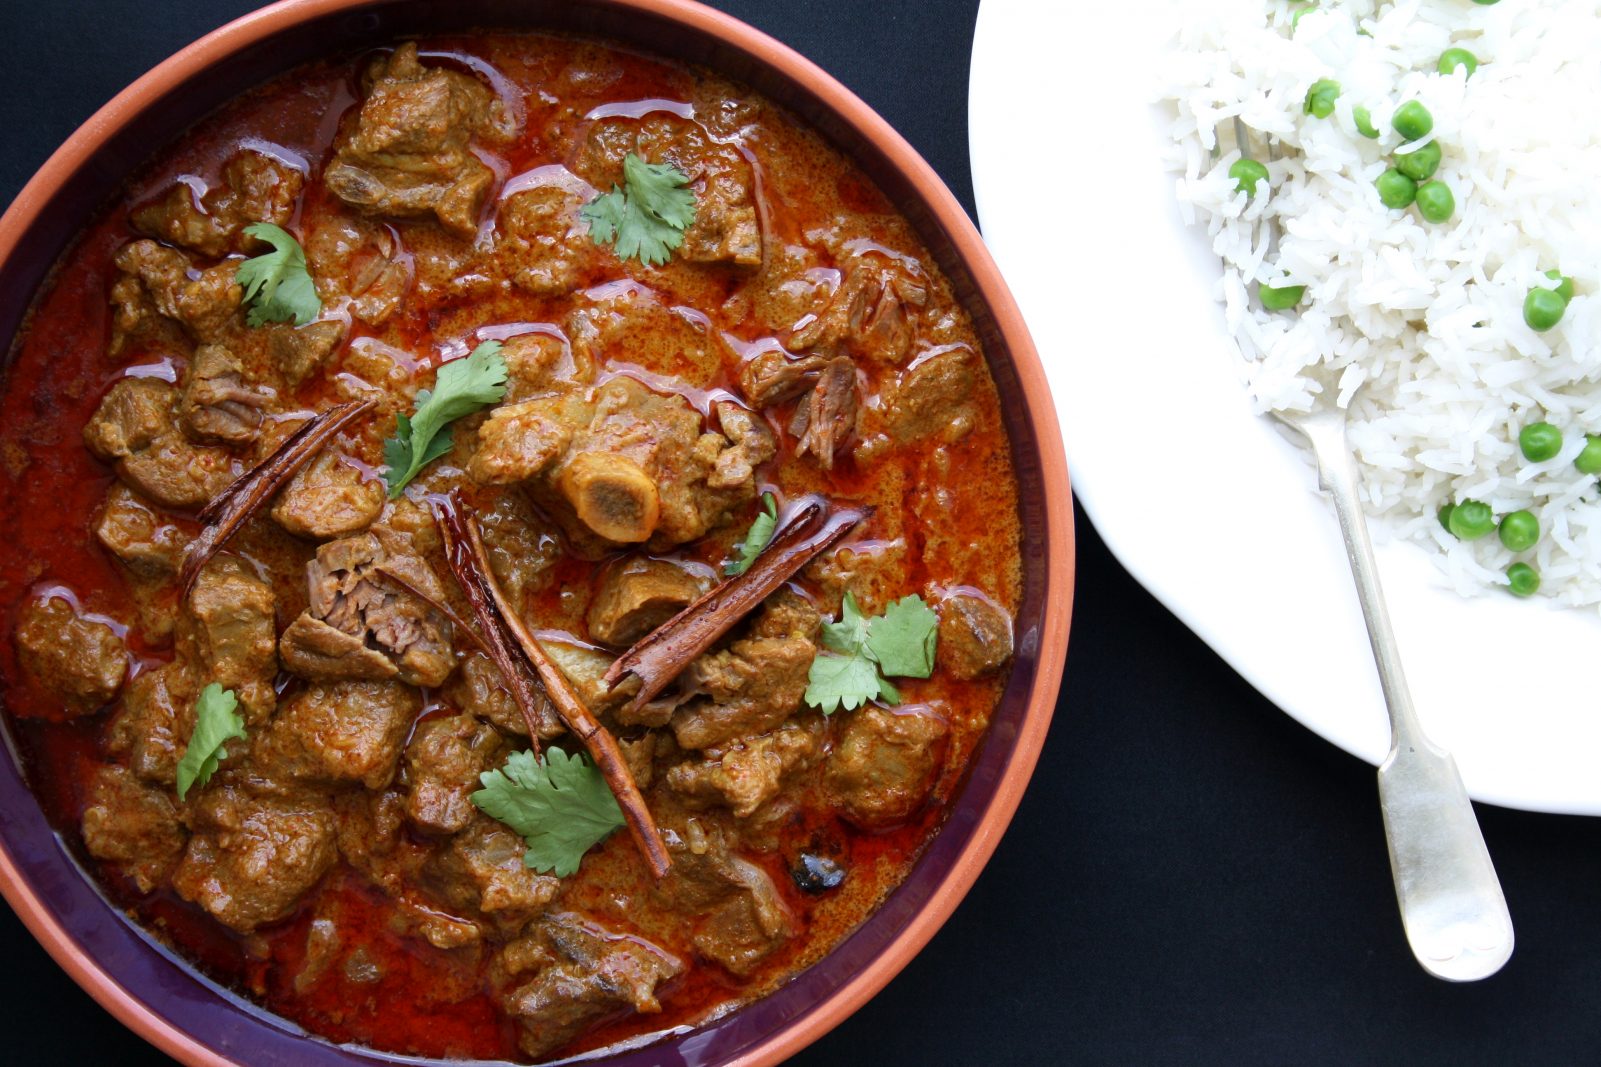 Your Indian Food Preferences Will Determine What Color Empowers You Rogan josh1